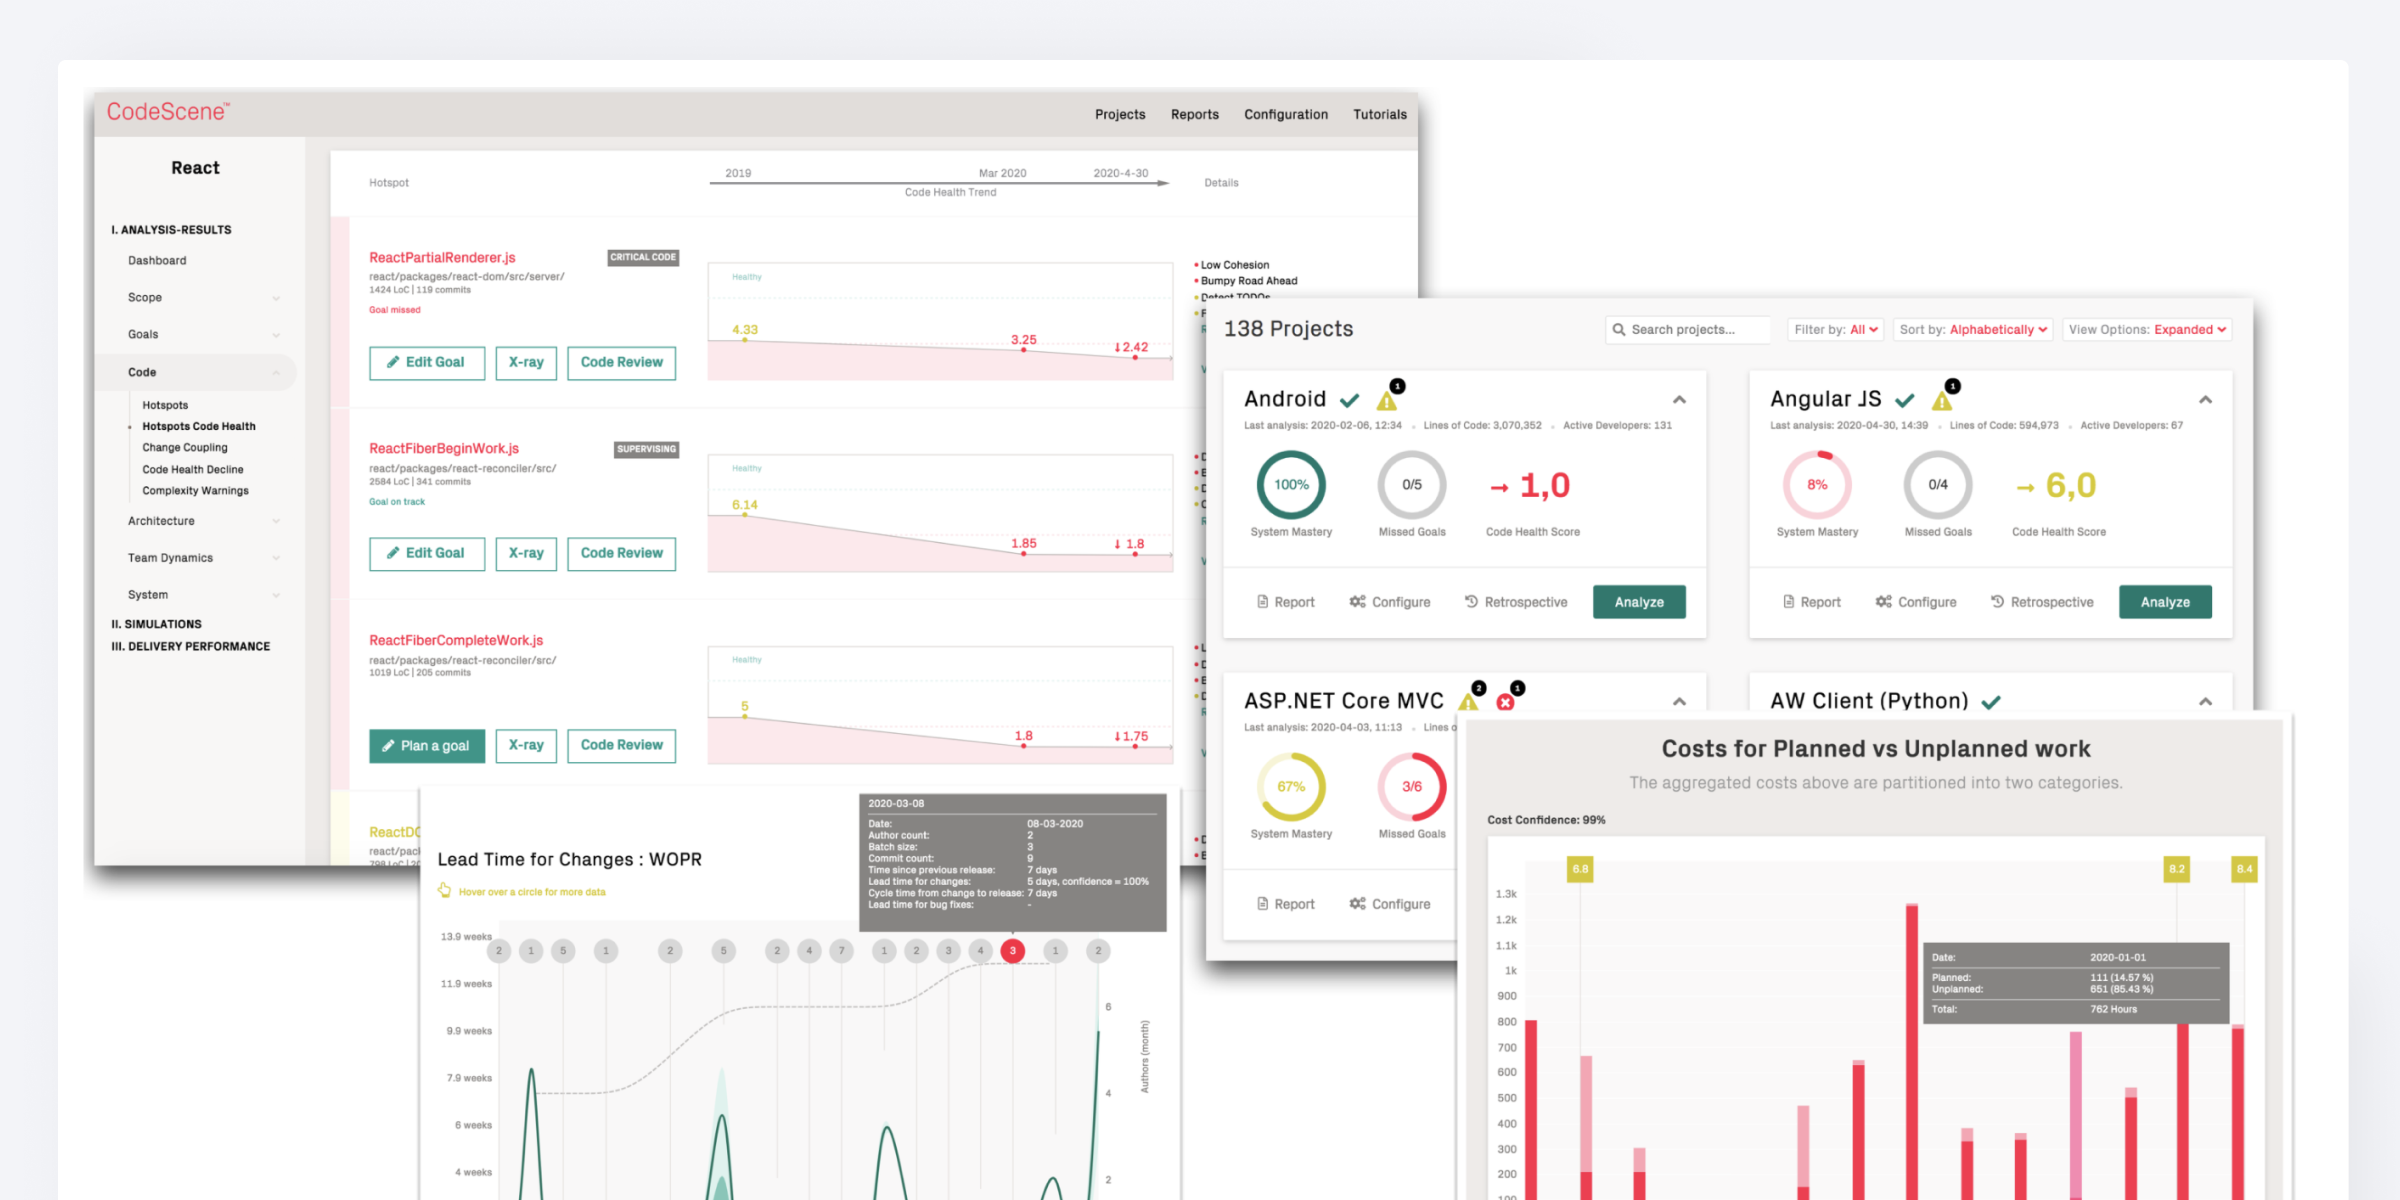 New dashboards with improved user experience used in CodeScene 4.0.